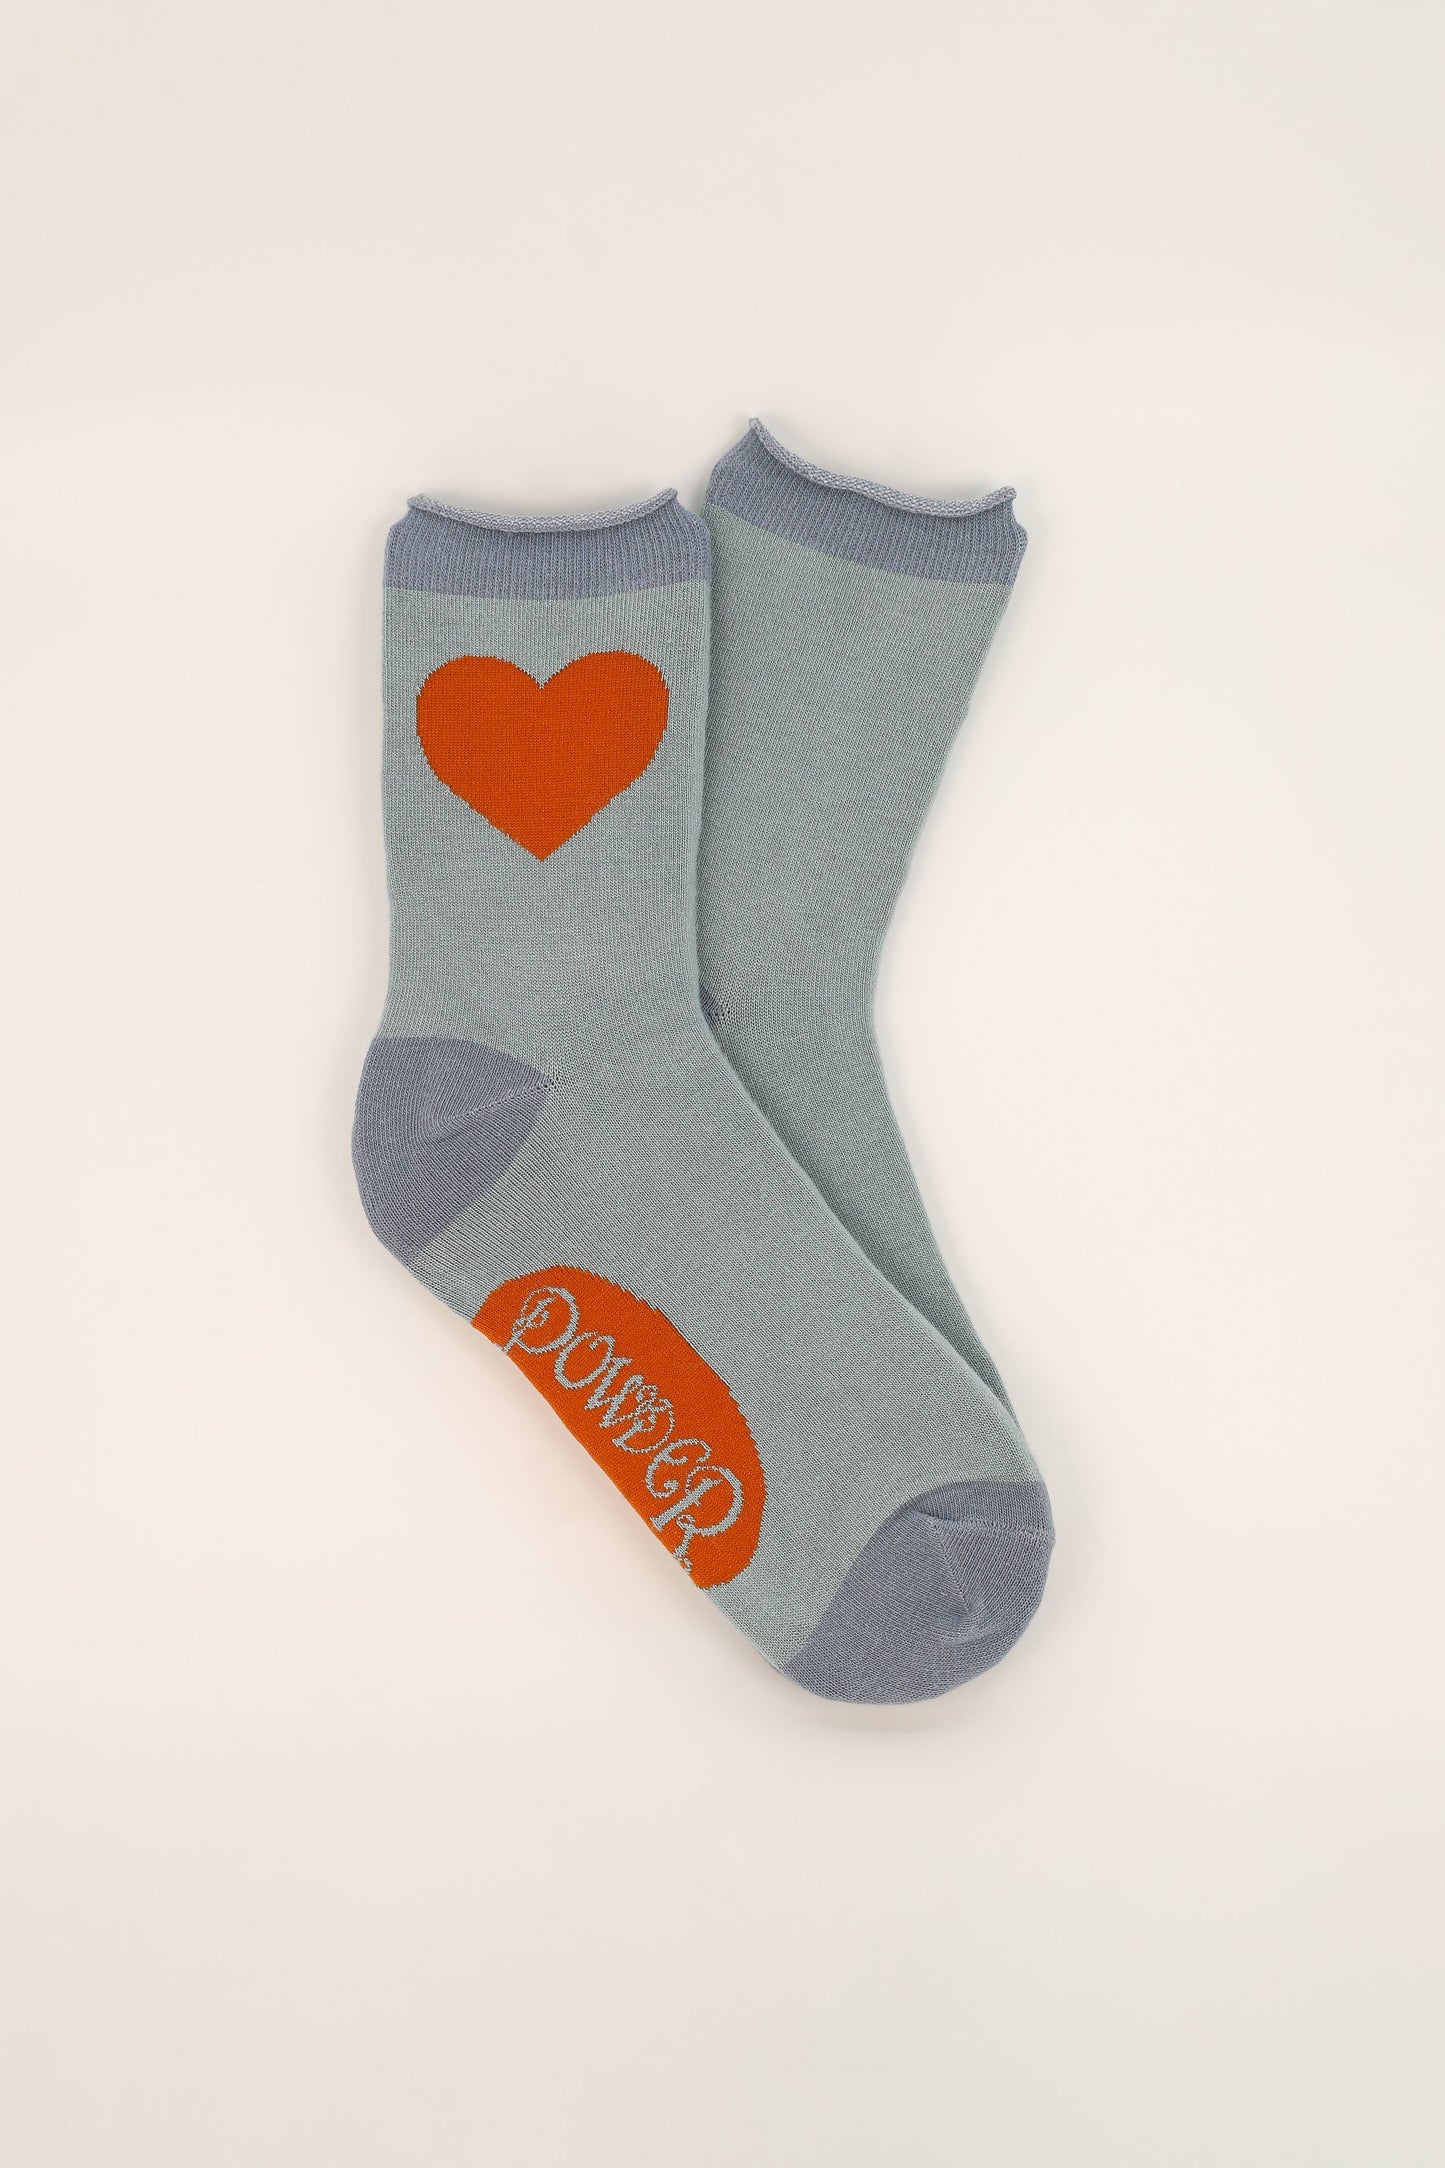 Powder Design inc - You Have My Heart Ankle Socks - Ice